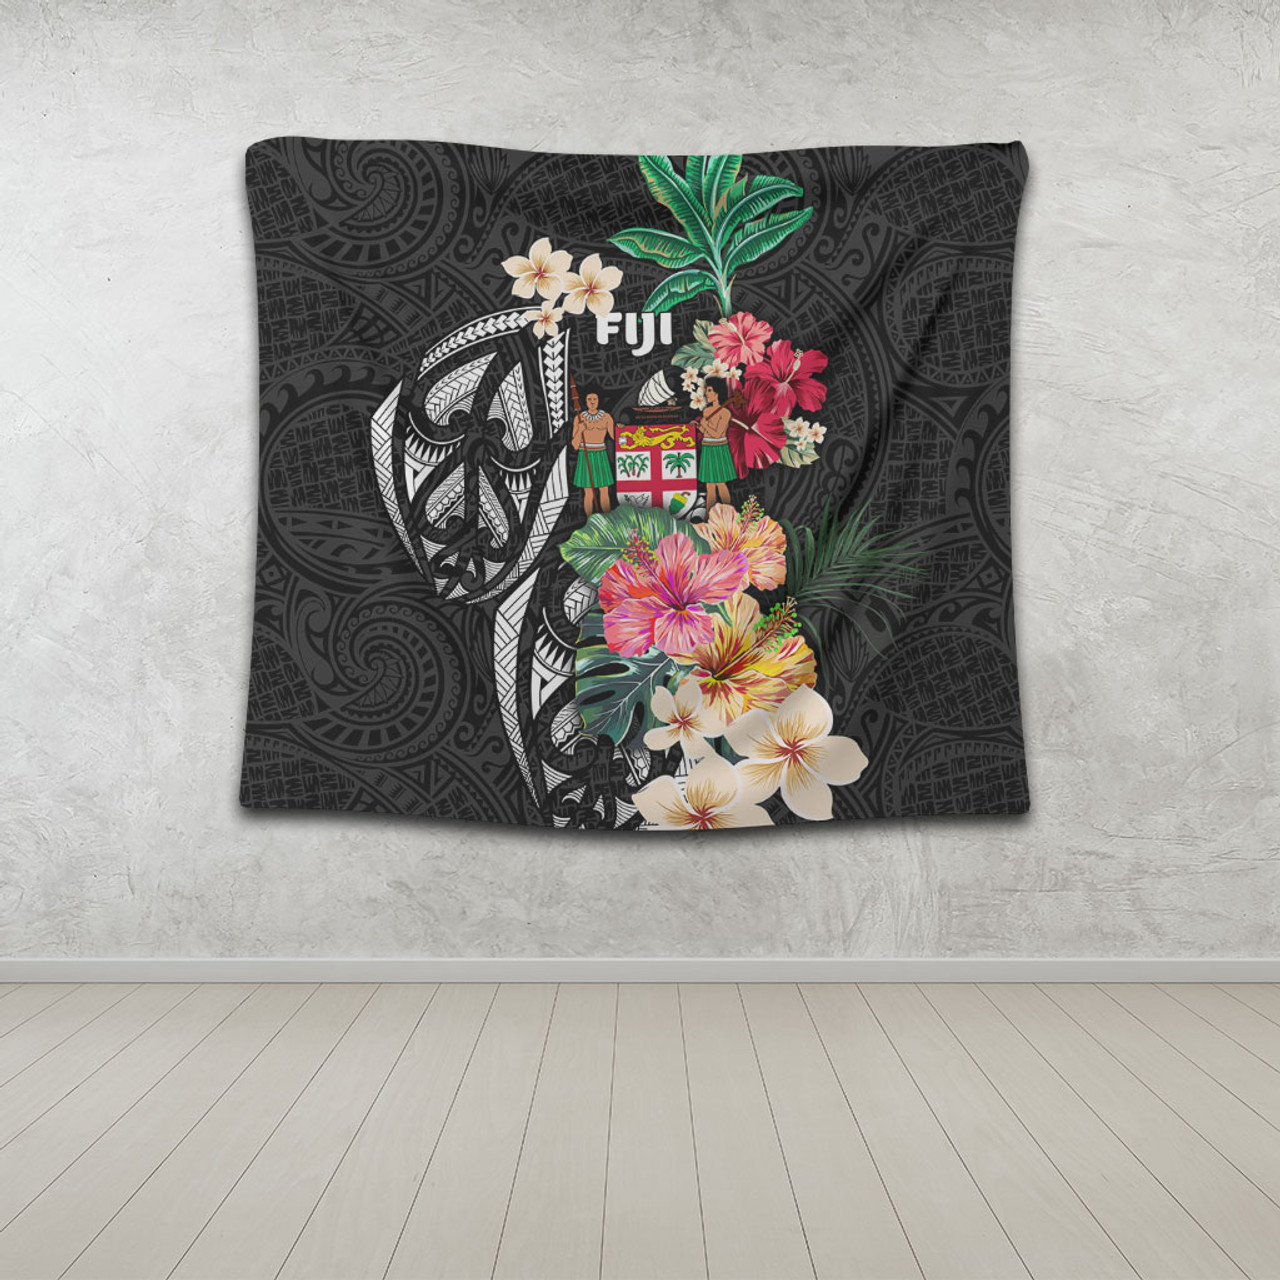 Fiji Tapestry Coat Of Arms Polynesian With Hibiscus